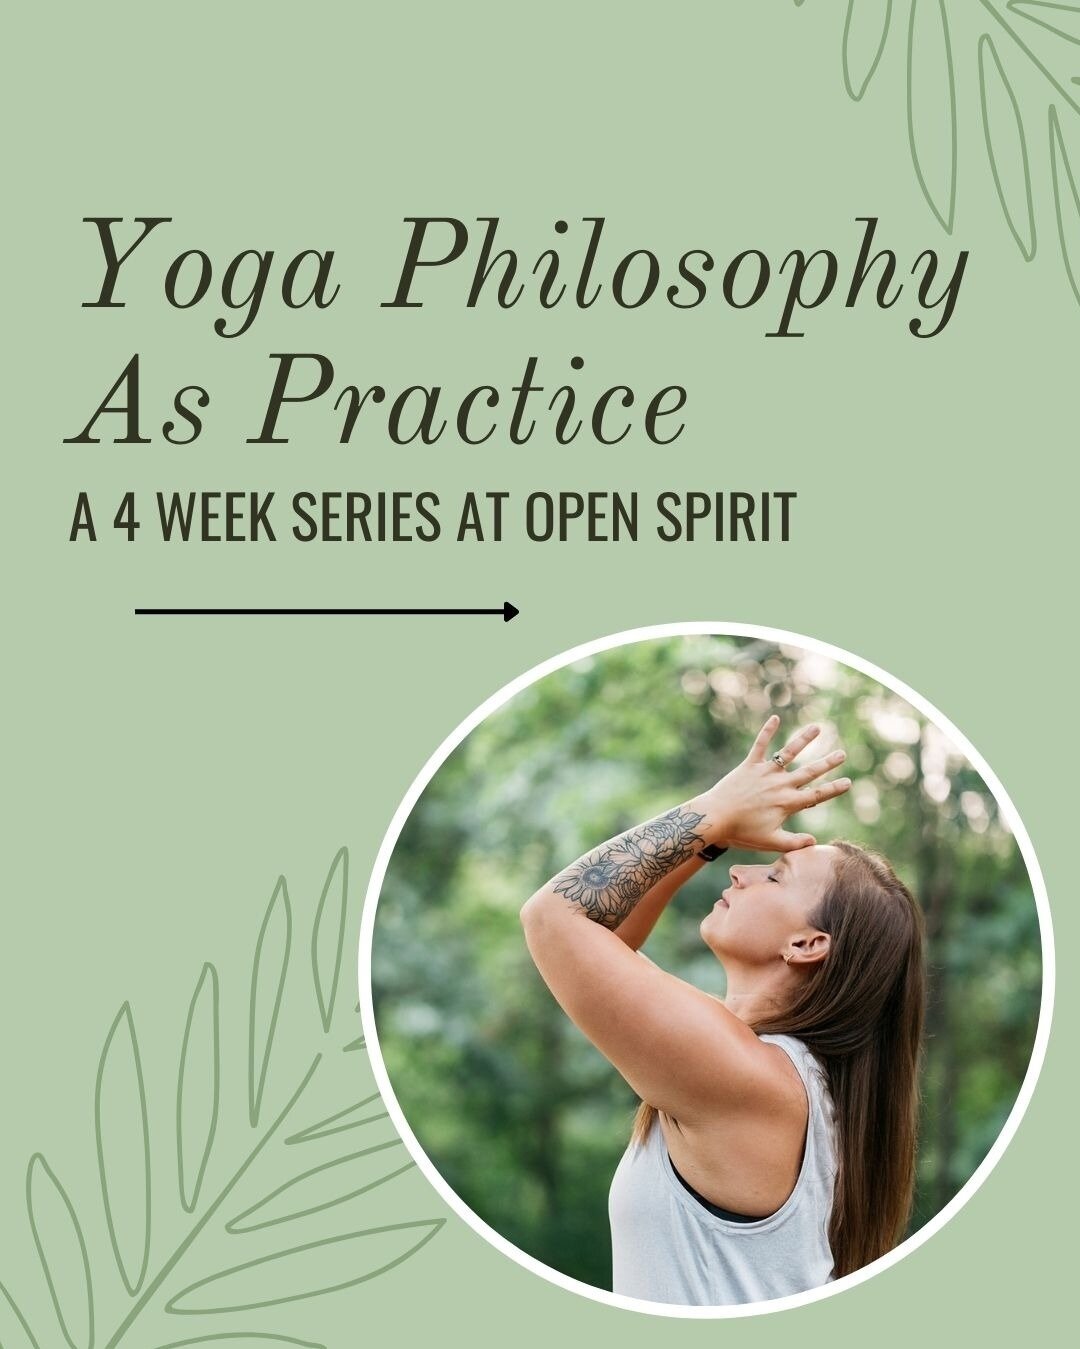 ✨New Series!✨ I'm excited to announce a special series coming to Open Spirit Center in Framingham starting April 28th.⁠
⁠
As part of my work towards completing my 300hr Advanced Yoga Teacher Training with @guiding_wellness, I've put together a 4-part